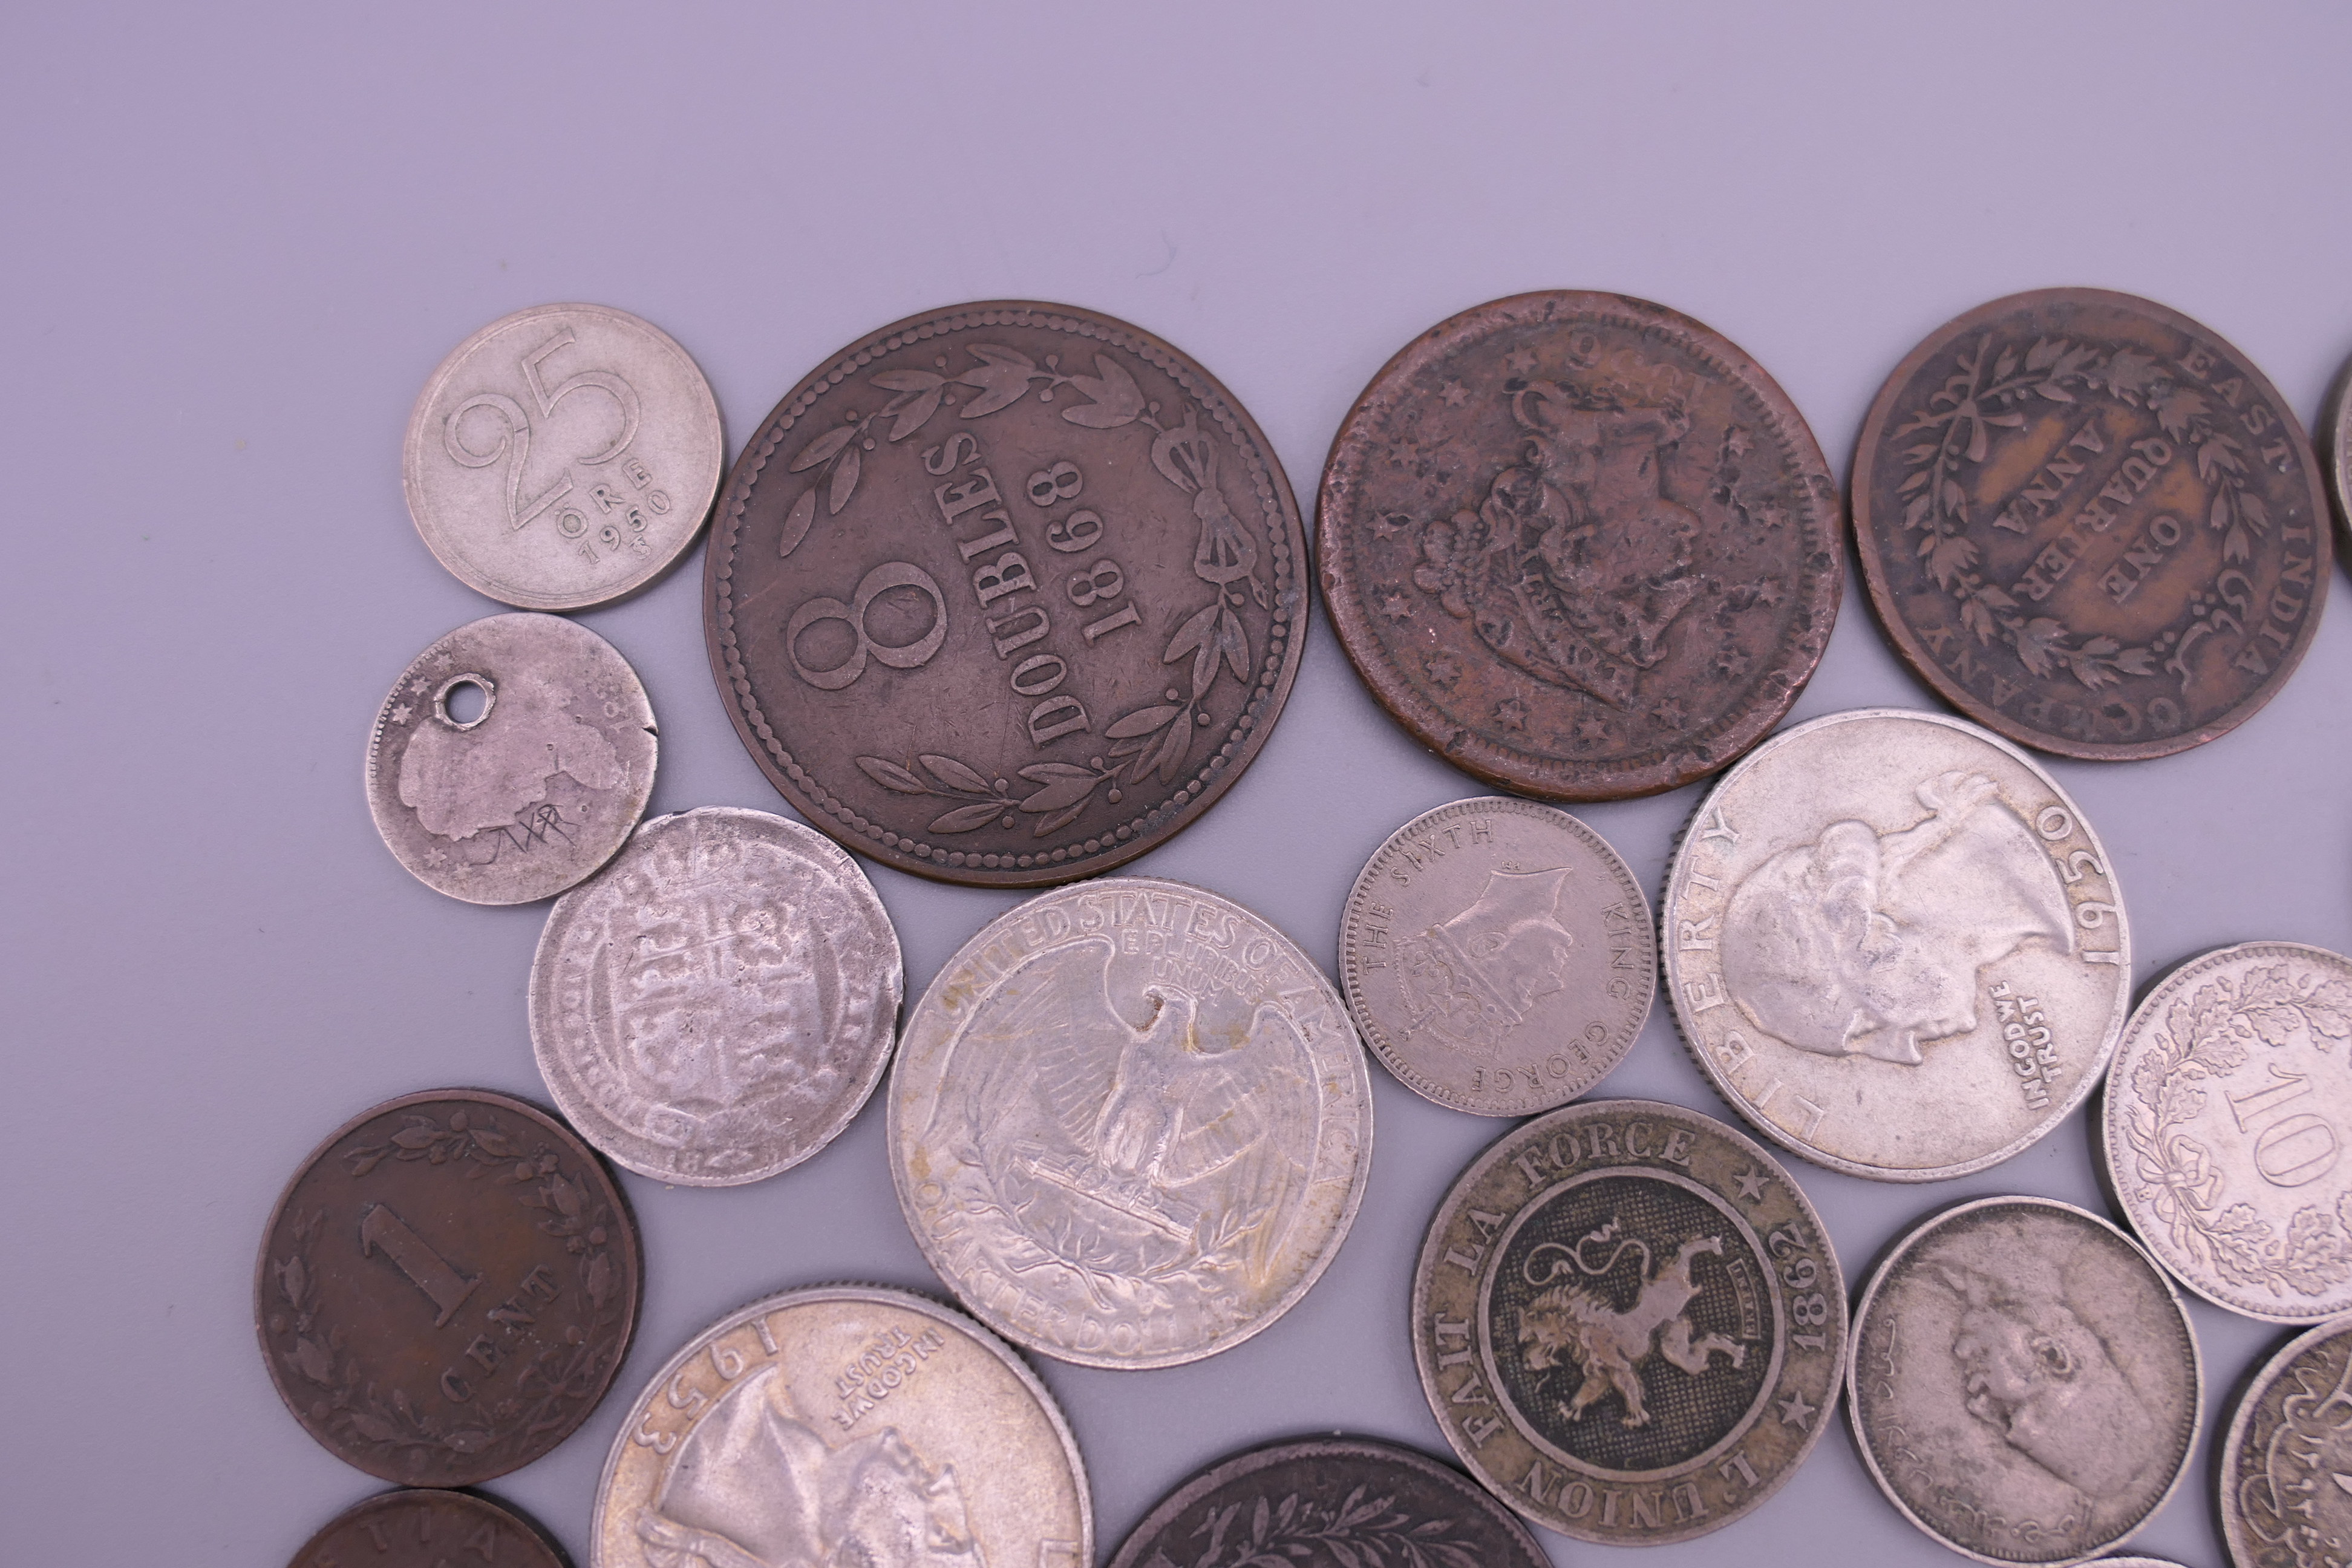 A bag of coins, including silver. - Image 6 of 8